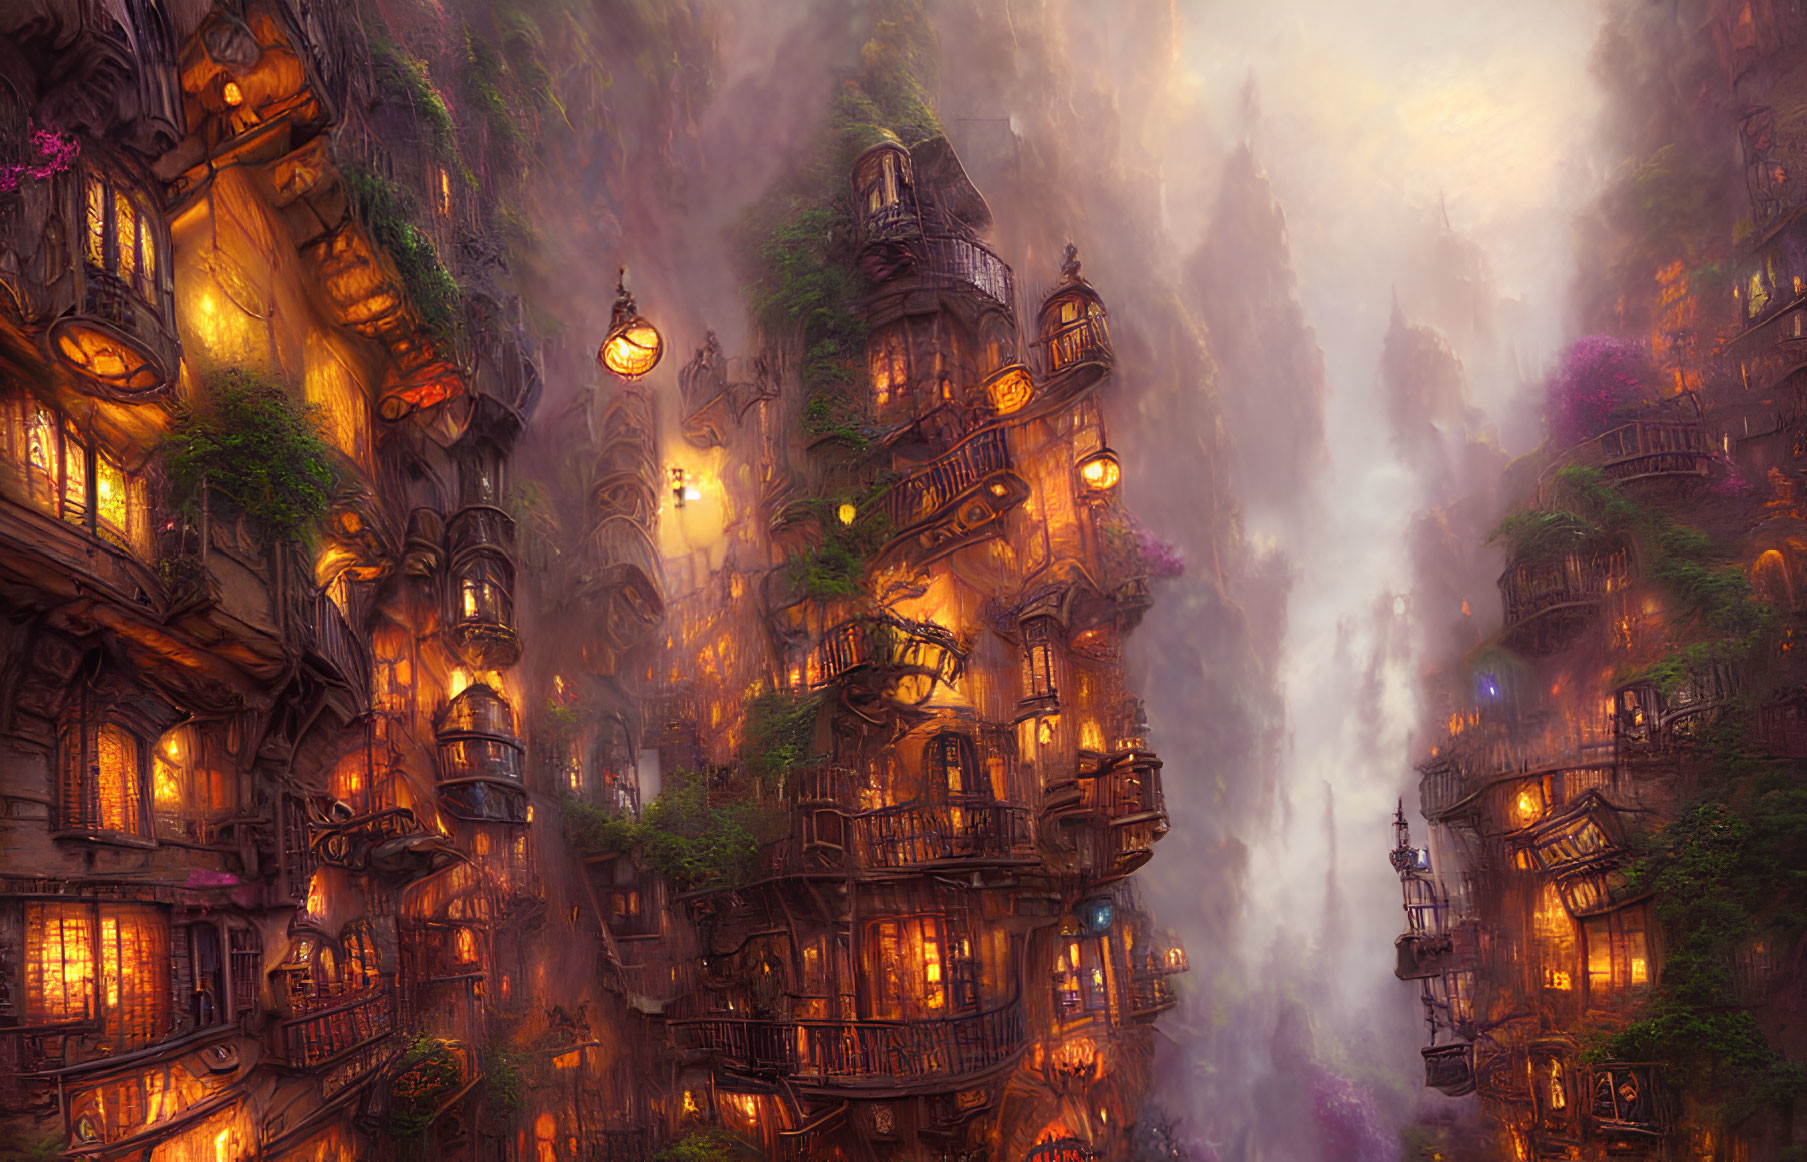 Enchanted cityscape with towering structures in mystical sunlight